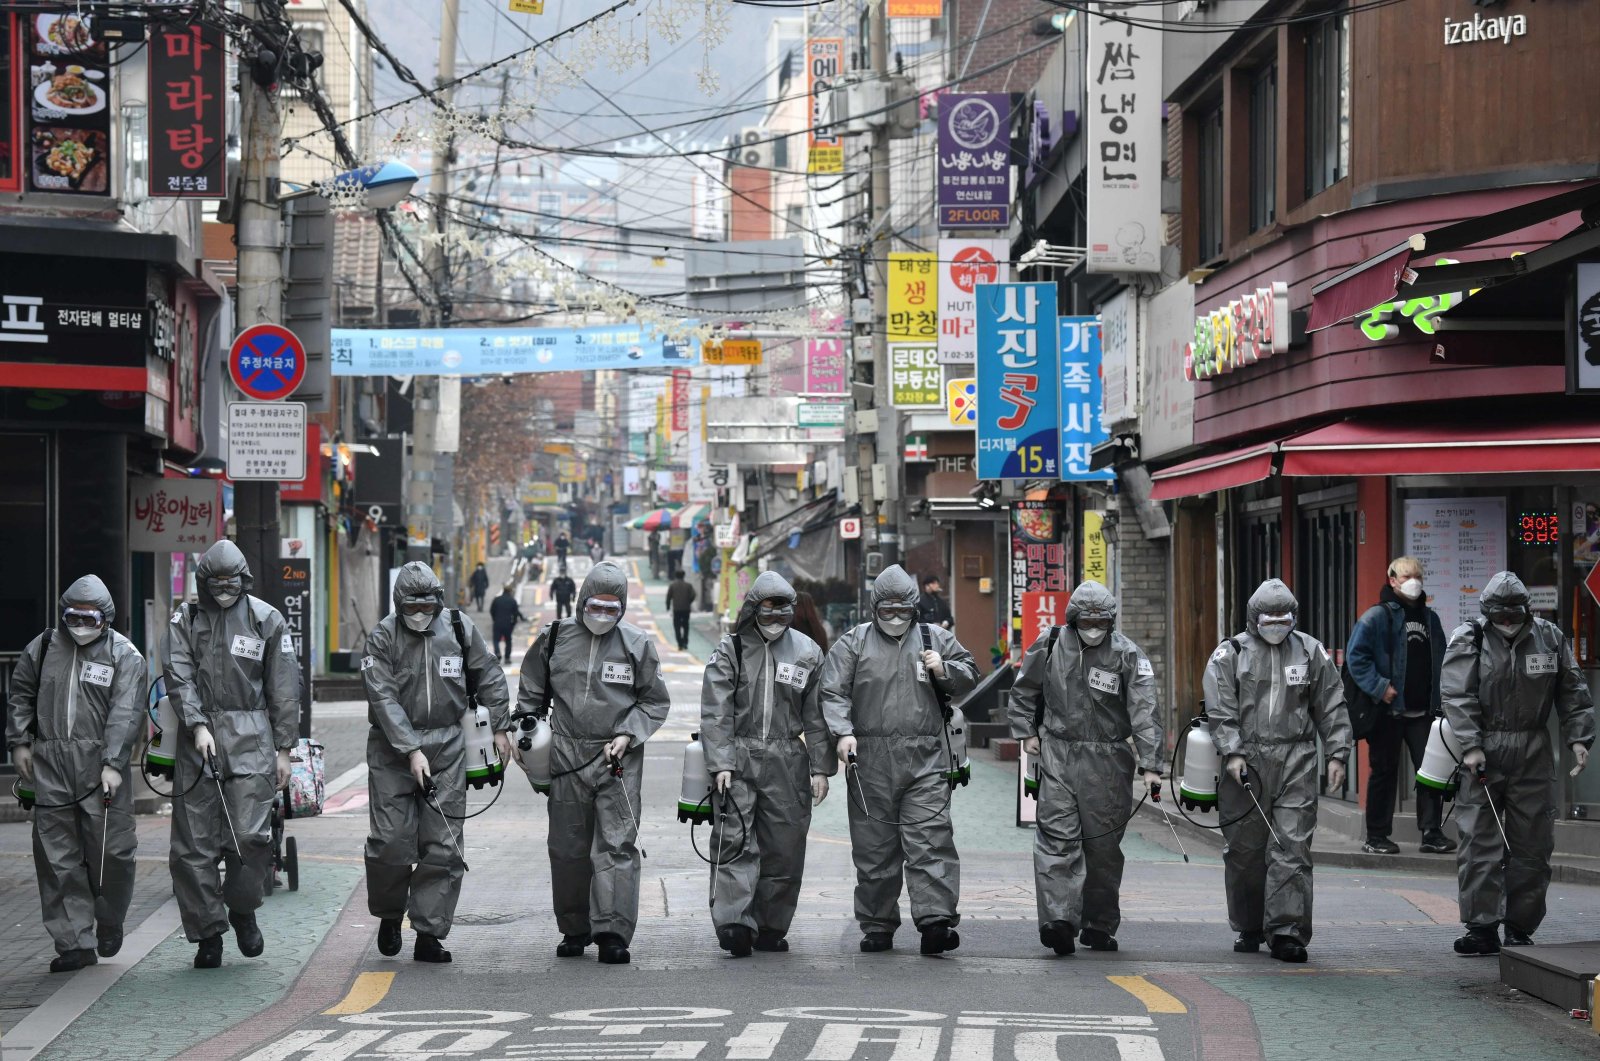 South Korean soldiers wearing protective gear spray disinfectant to help prevent the spread of the COVID-19 coronavirus, at a shopping district in Seoul, March 4, 2020. (AFP Photo)